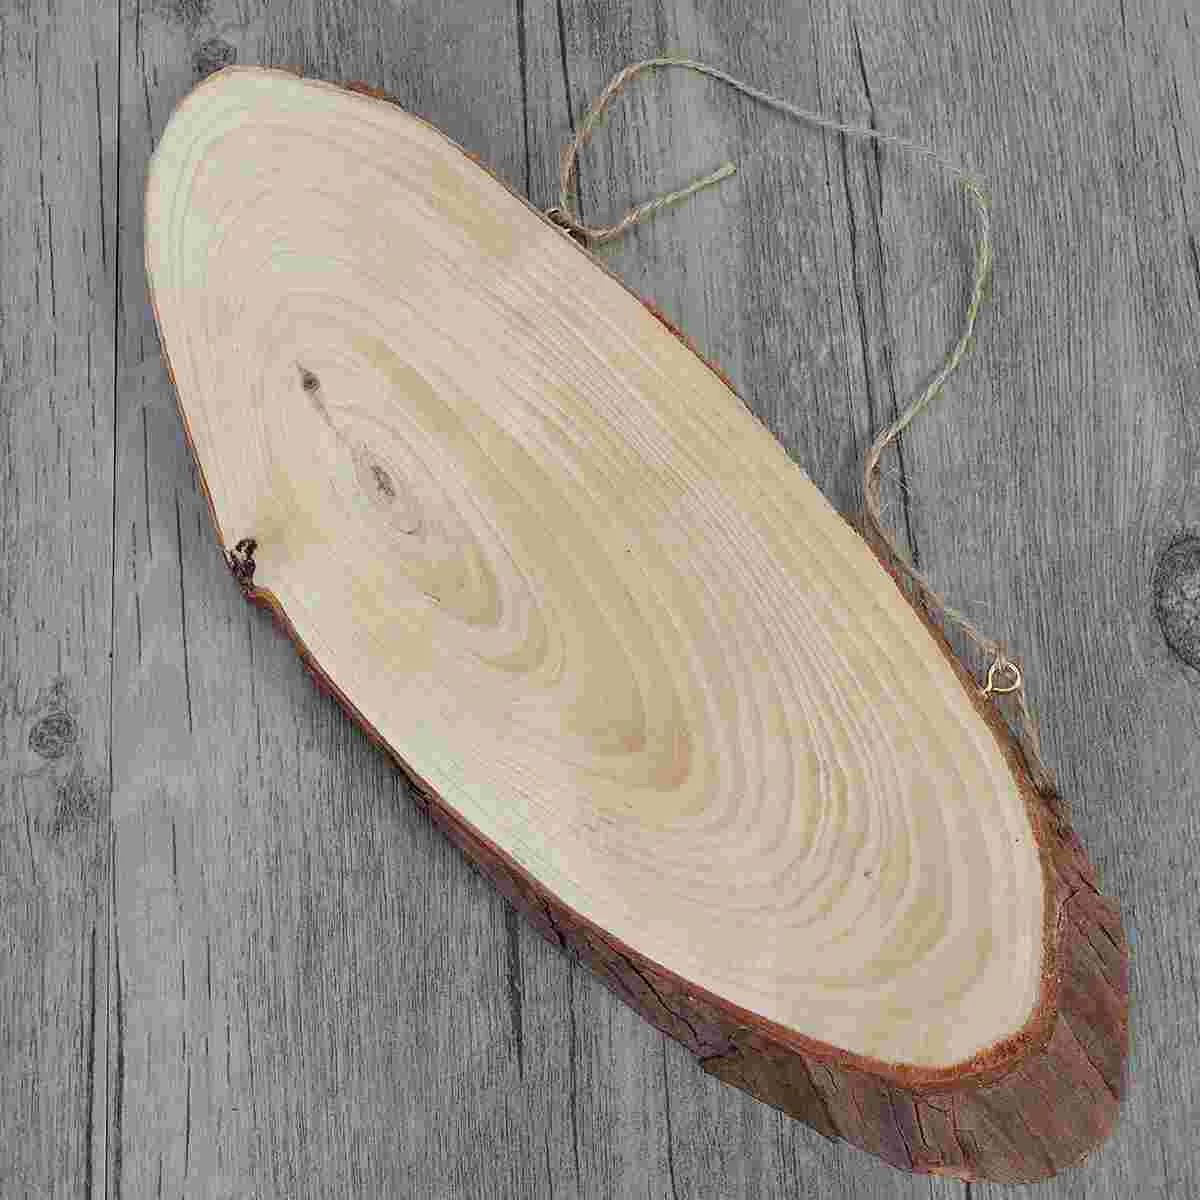 2Pcs Unfinished Oval Blank Wooden Disc Tree Log Slice Plaques with Rope for DIY Decoration Crafts Projects